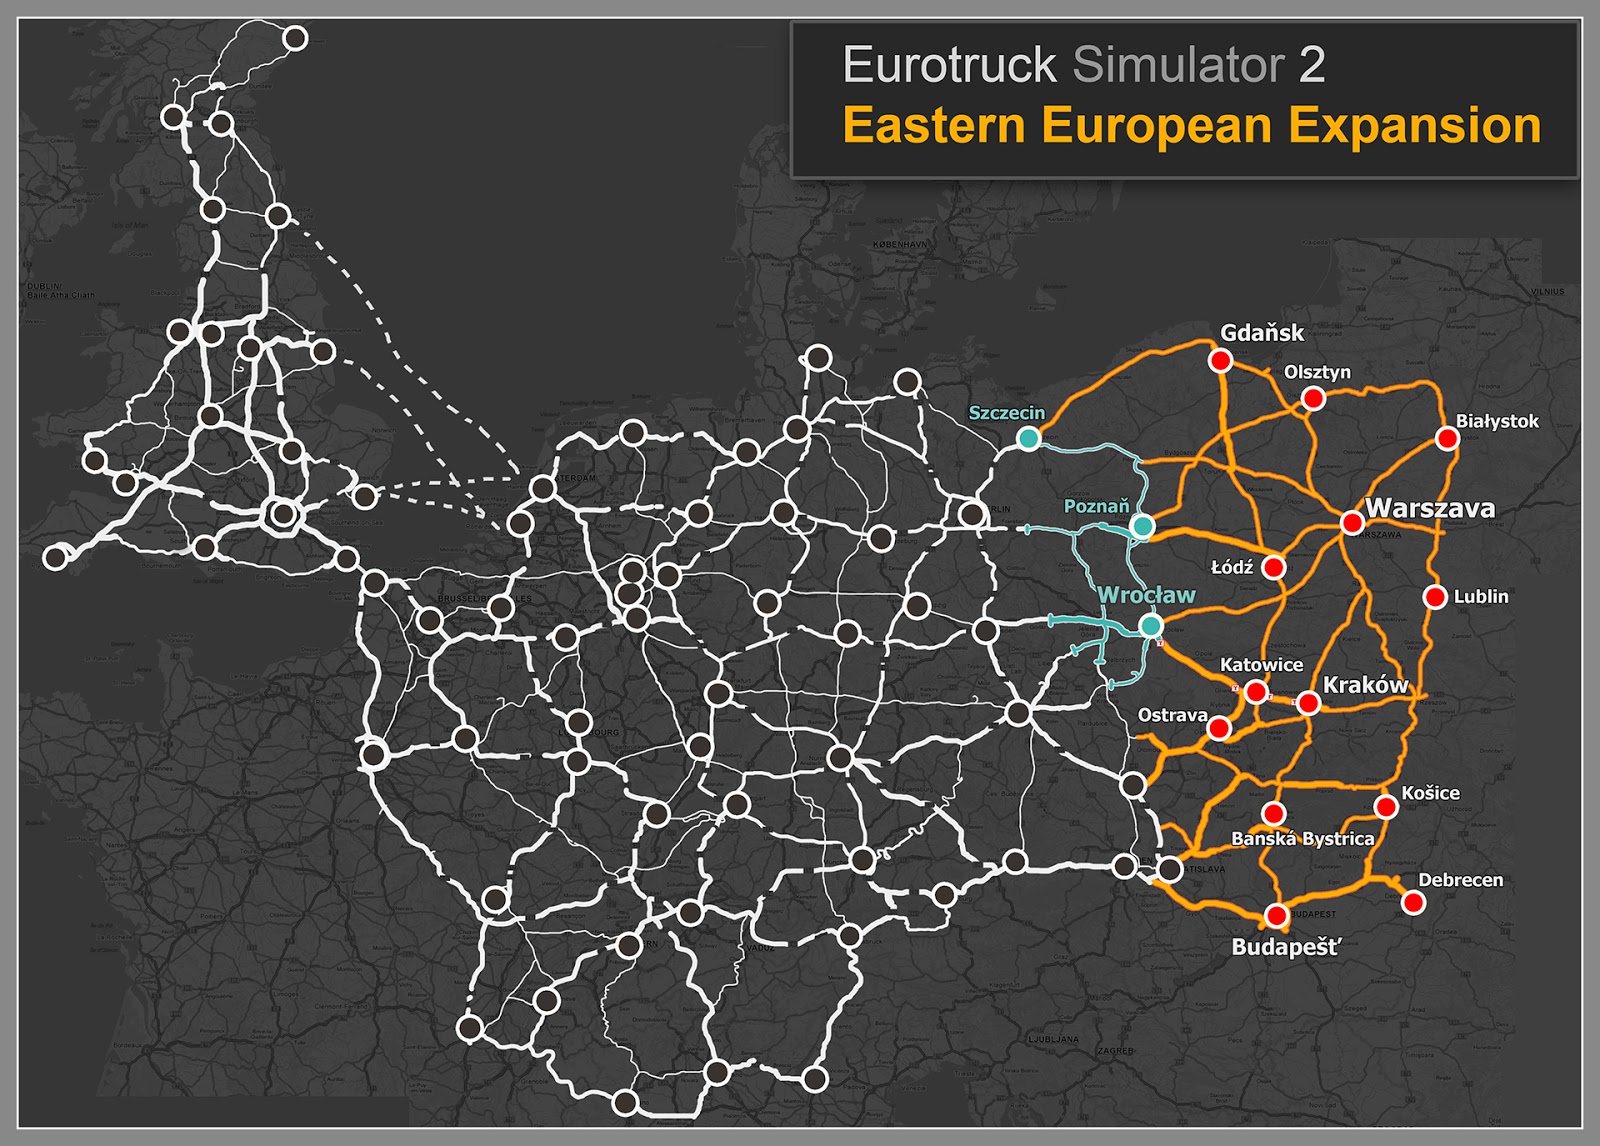 Euro Truck Simulator 2: Going East Add-On : : Games